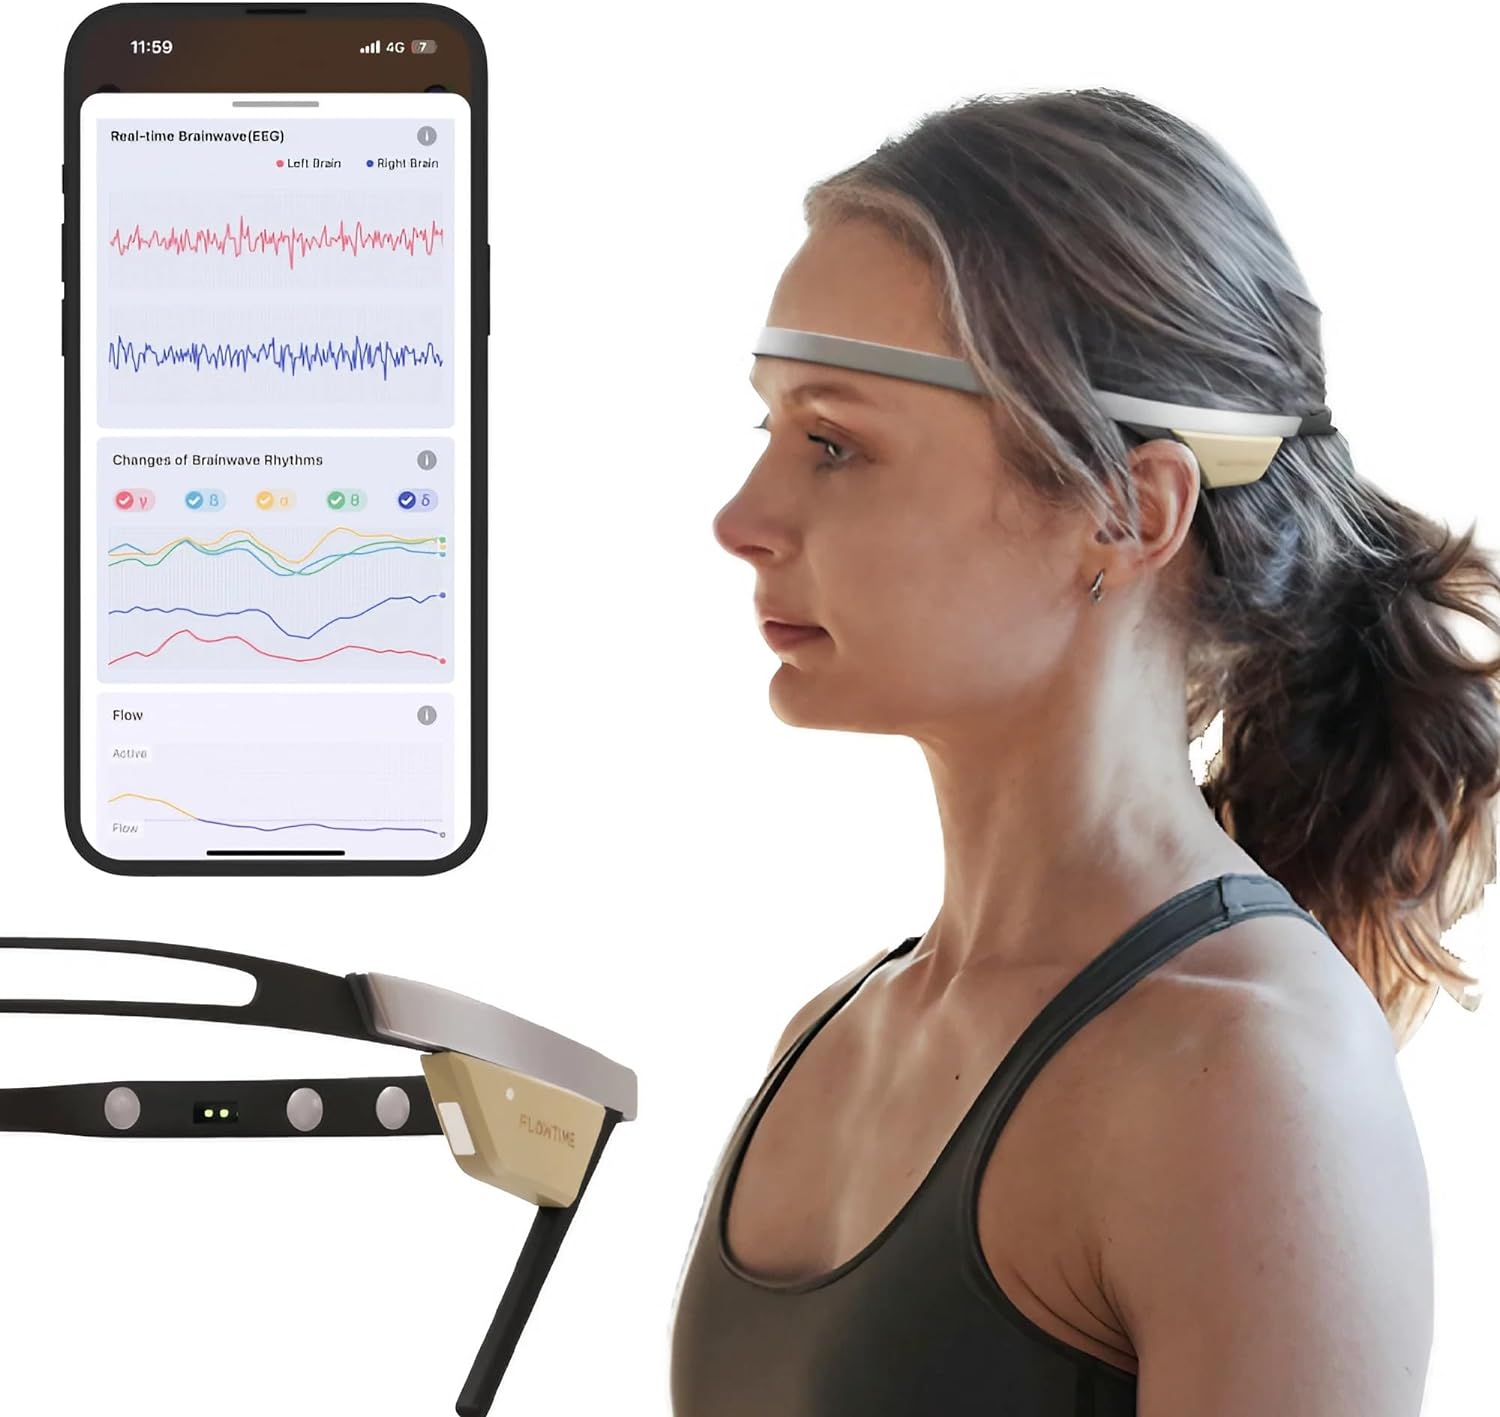 VISUALIZE YOUR MEDITATION PERFORMANCE. Supported by the biosensing technology, see how your brain and body are working when you are doing meditation. Real-time brainwaves, heart rate, HRV, relaxation, attention and pressure level tell you whether you are getting into meditation states.